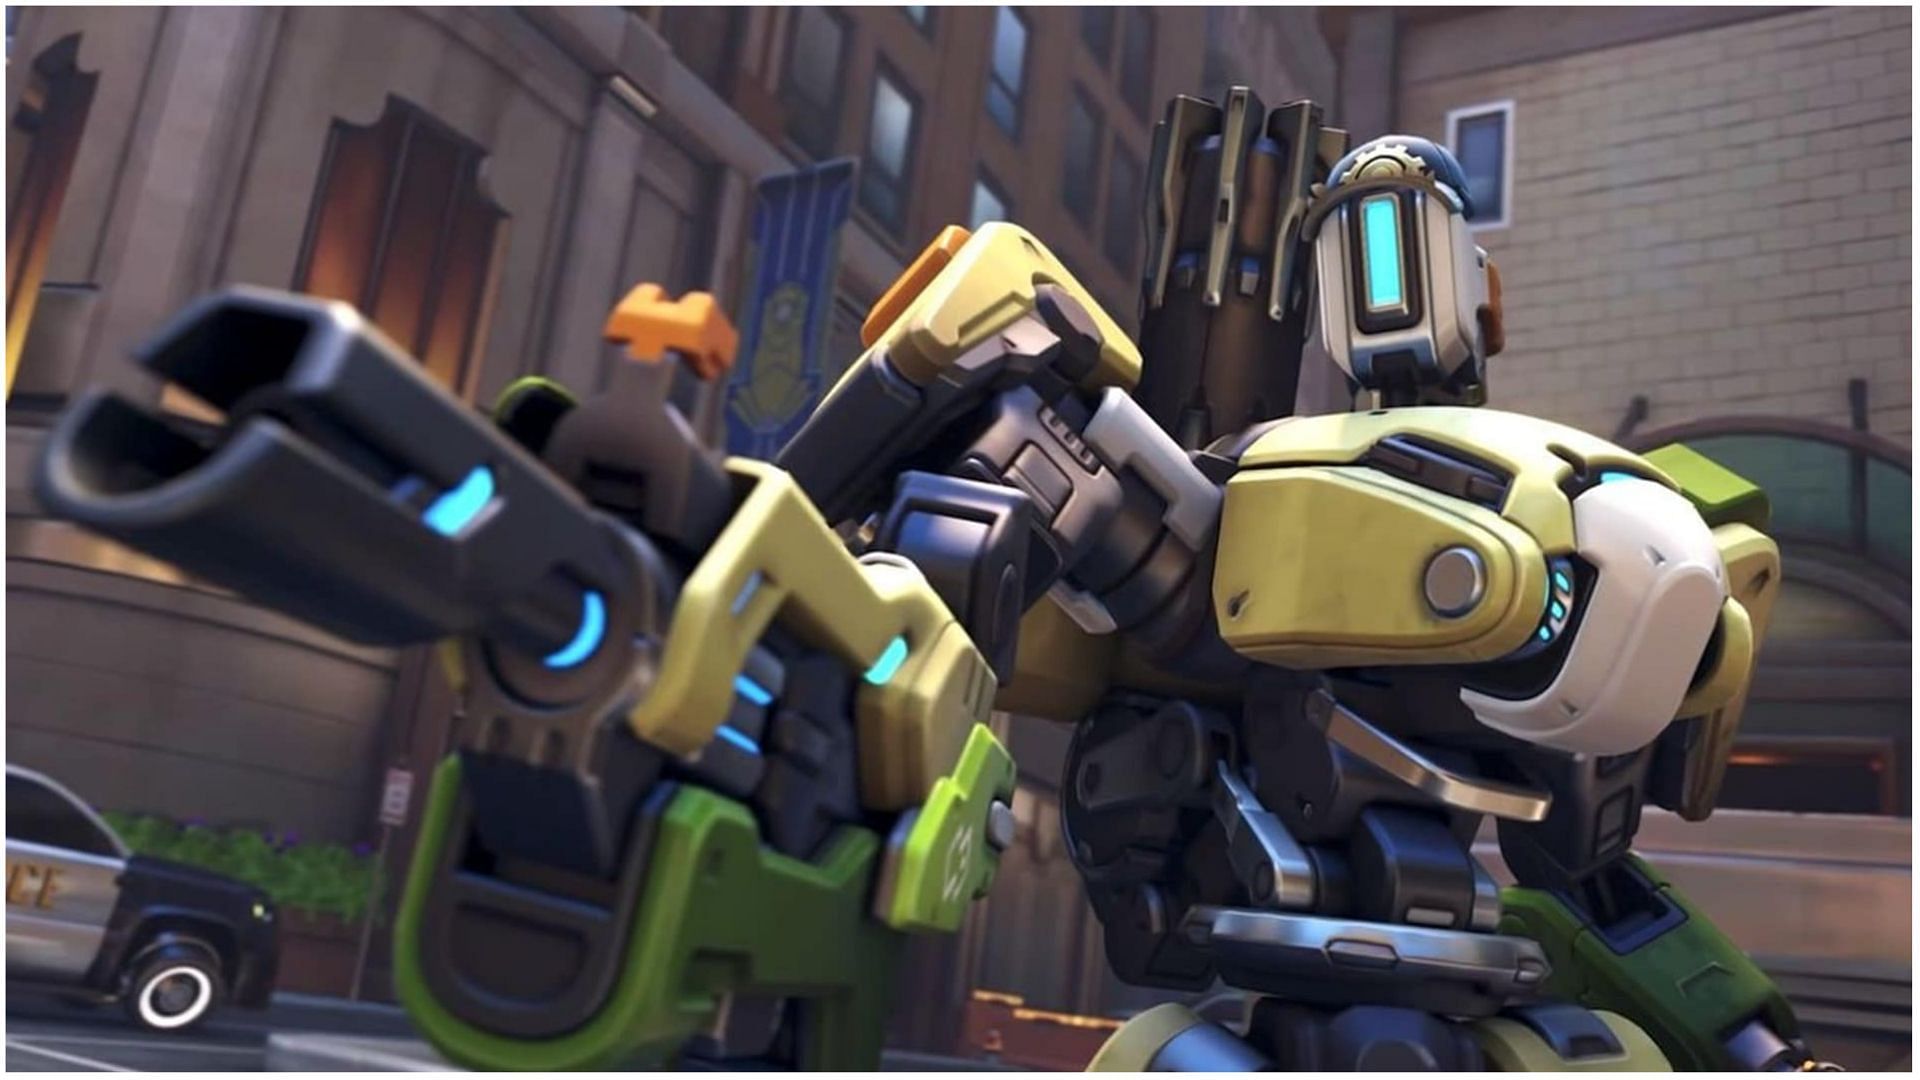 Bastion is a damage hero in Overwatch 2 (Image via Activision Blizzard)